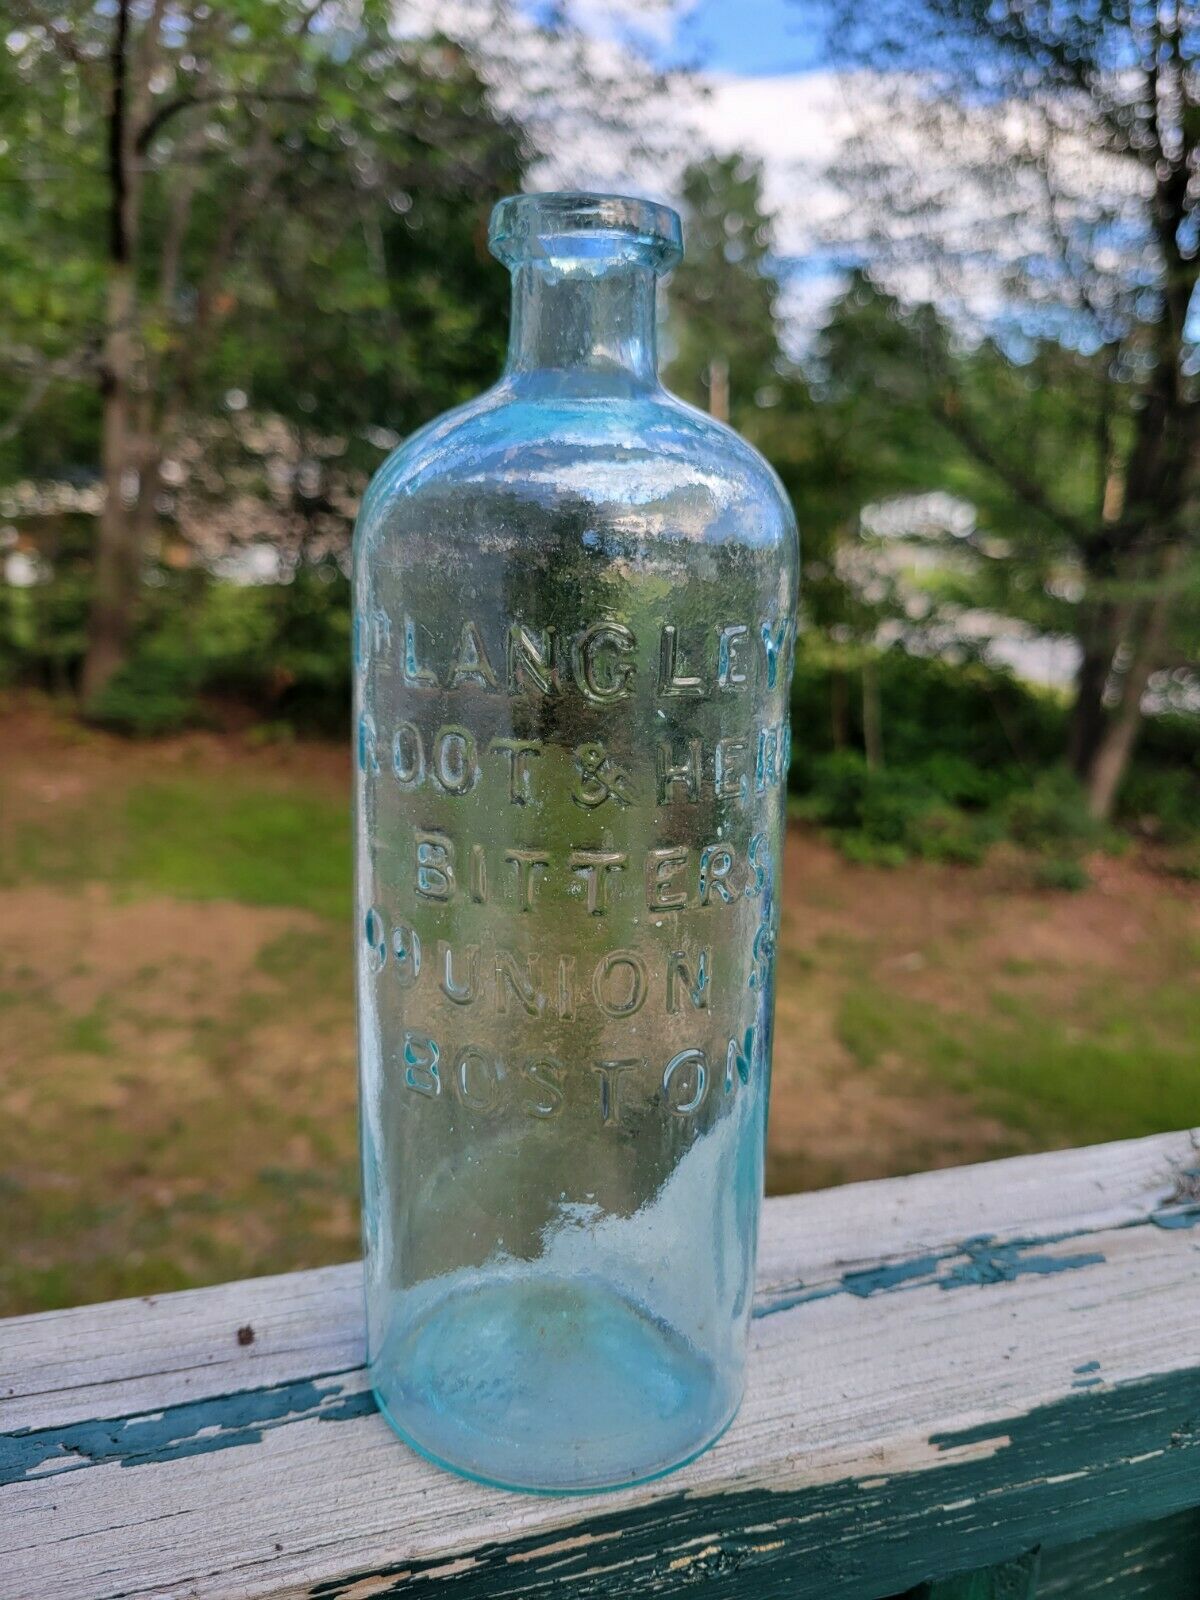 Scarce Antique Dr Langley Root & Bitters 99 Union St Boston Bottle (tall Style)